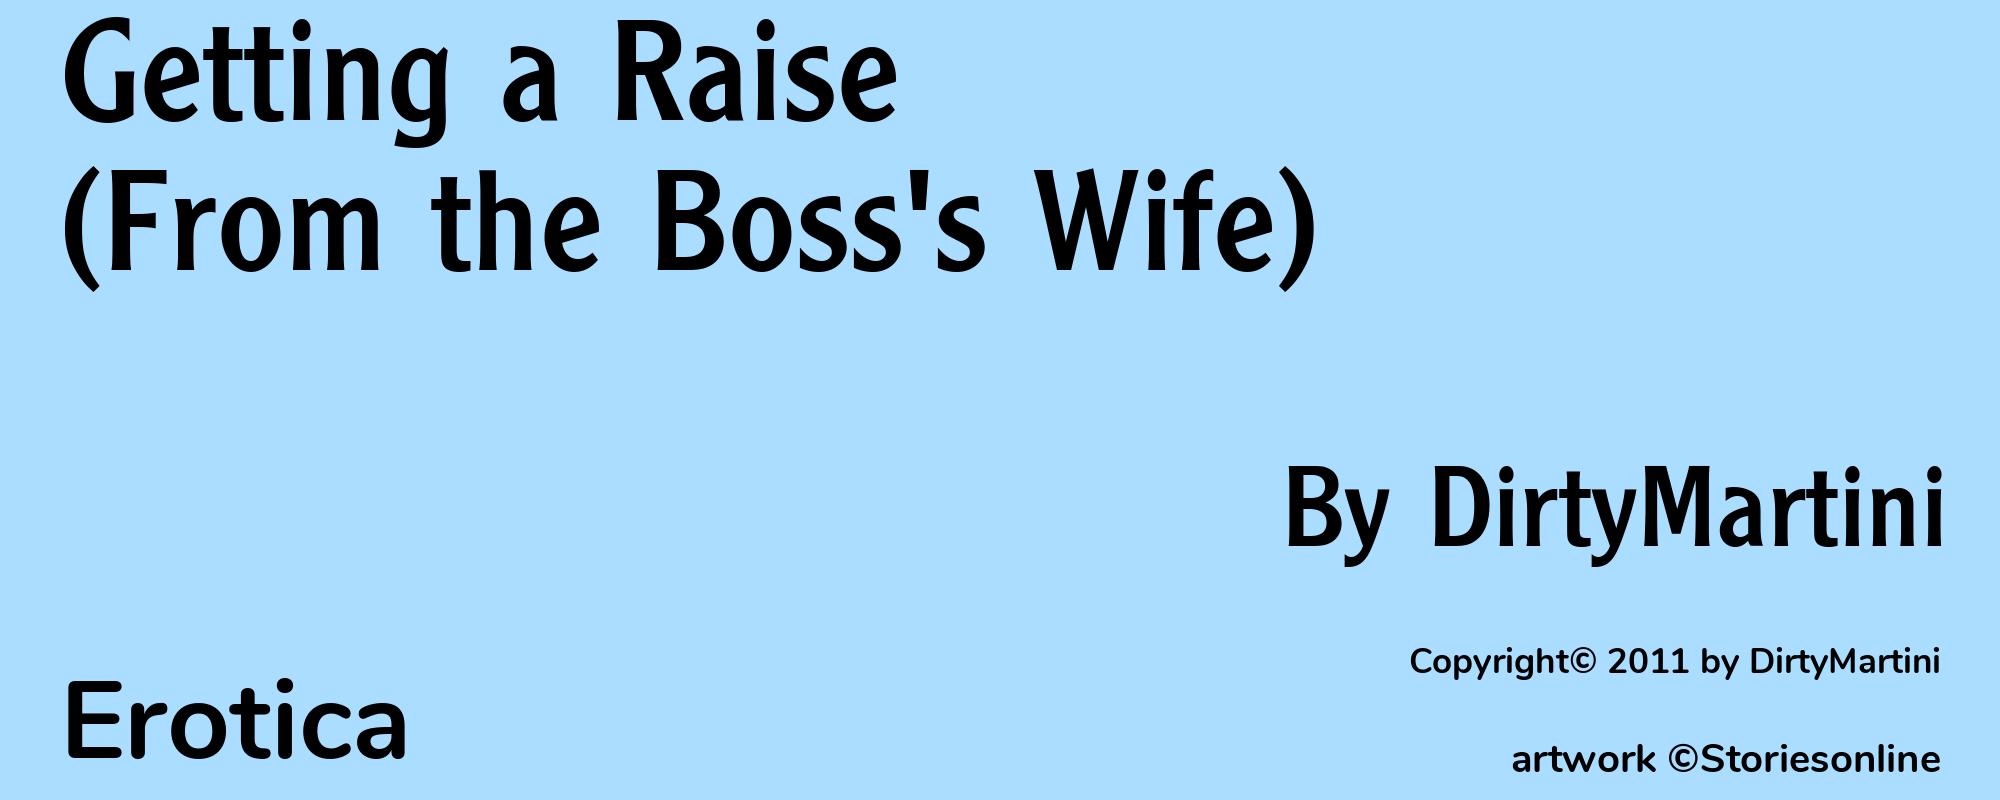 Getting a Raise (From the Boss's Wife) - Cover